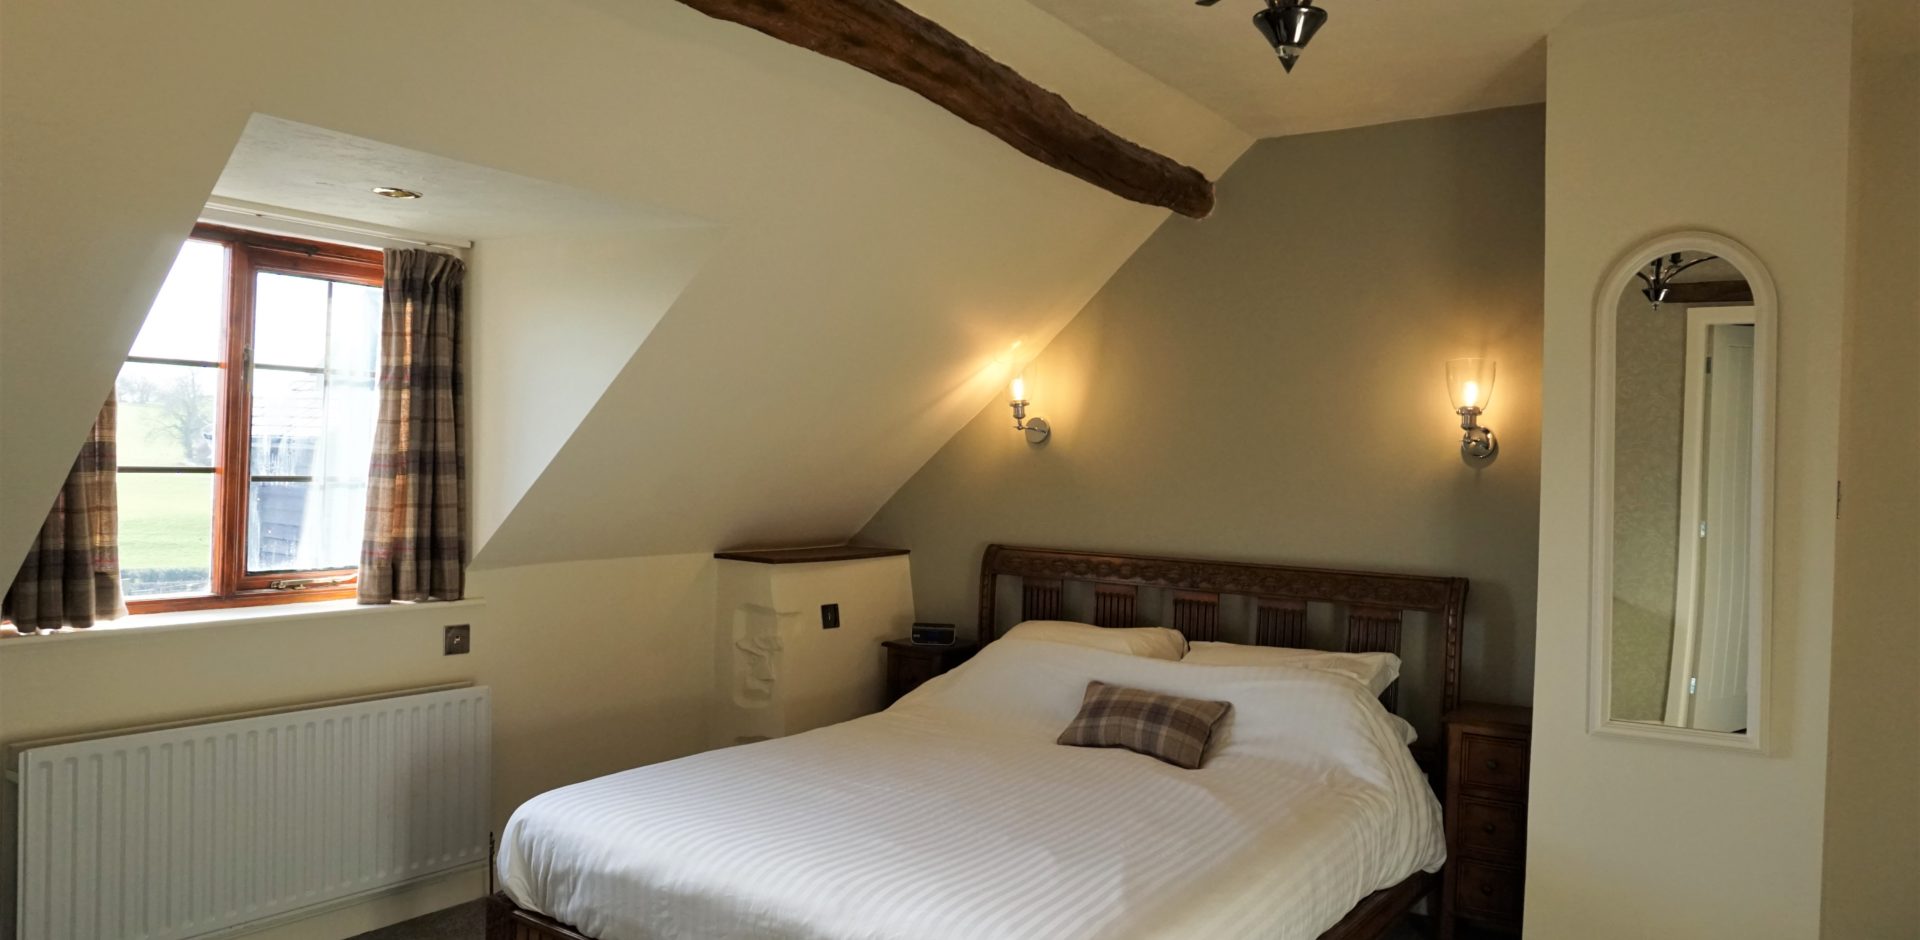 With a super king-size bed. Barley cottage offers the ideal couples hot tub holiday